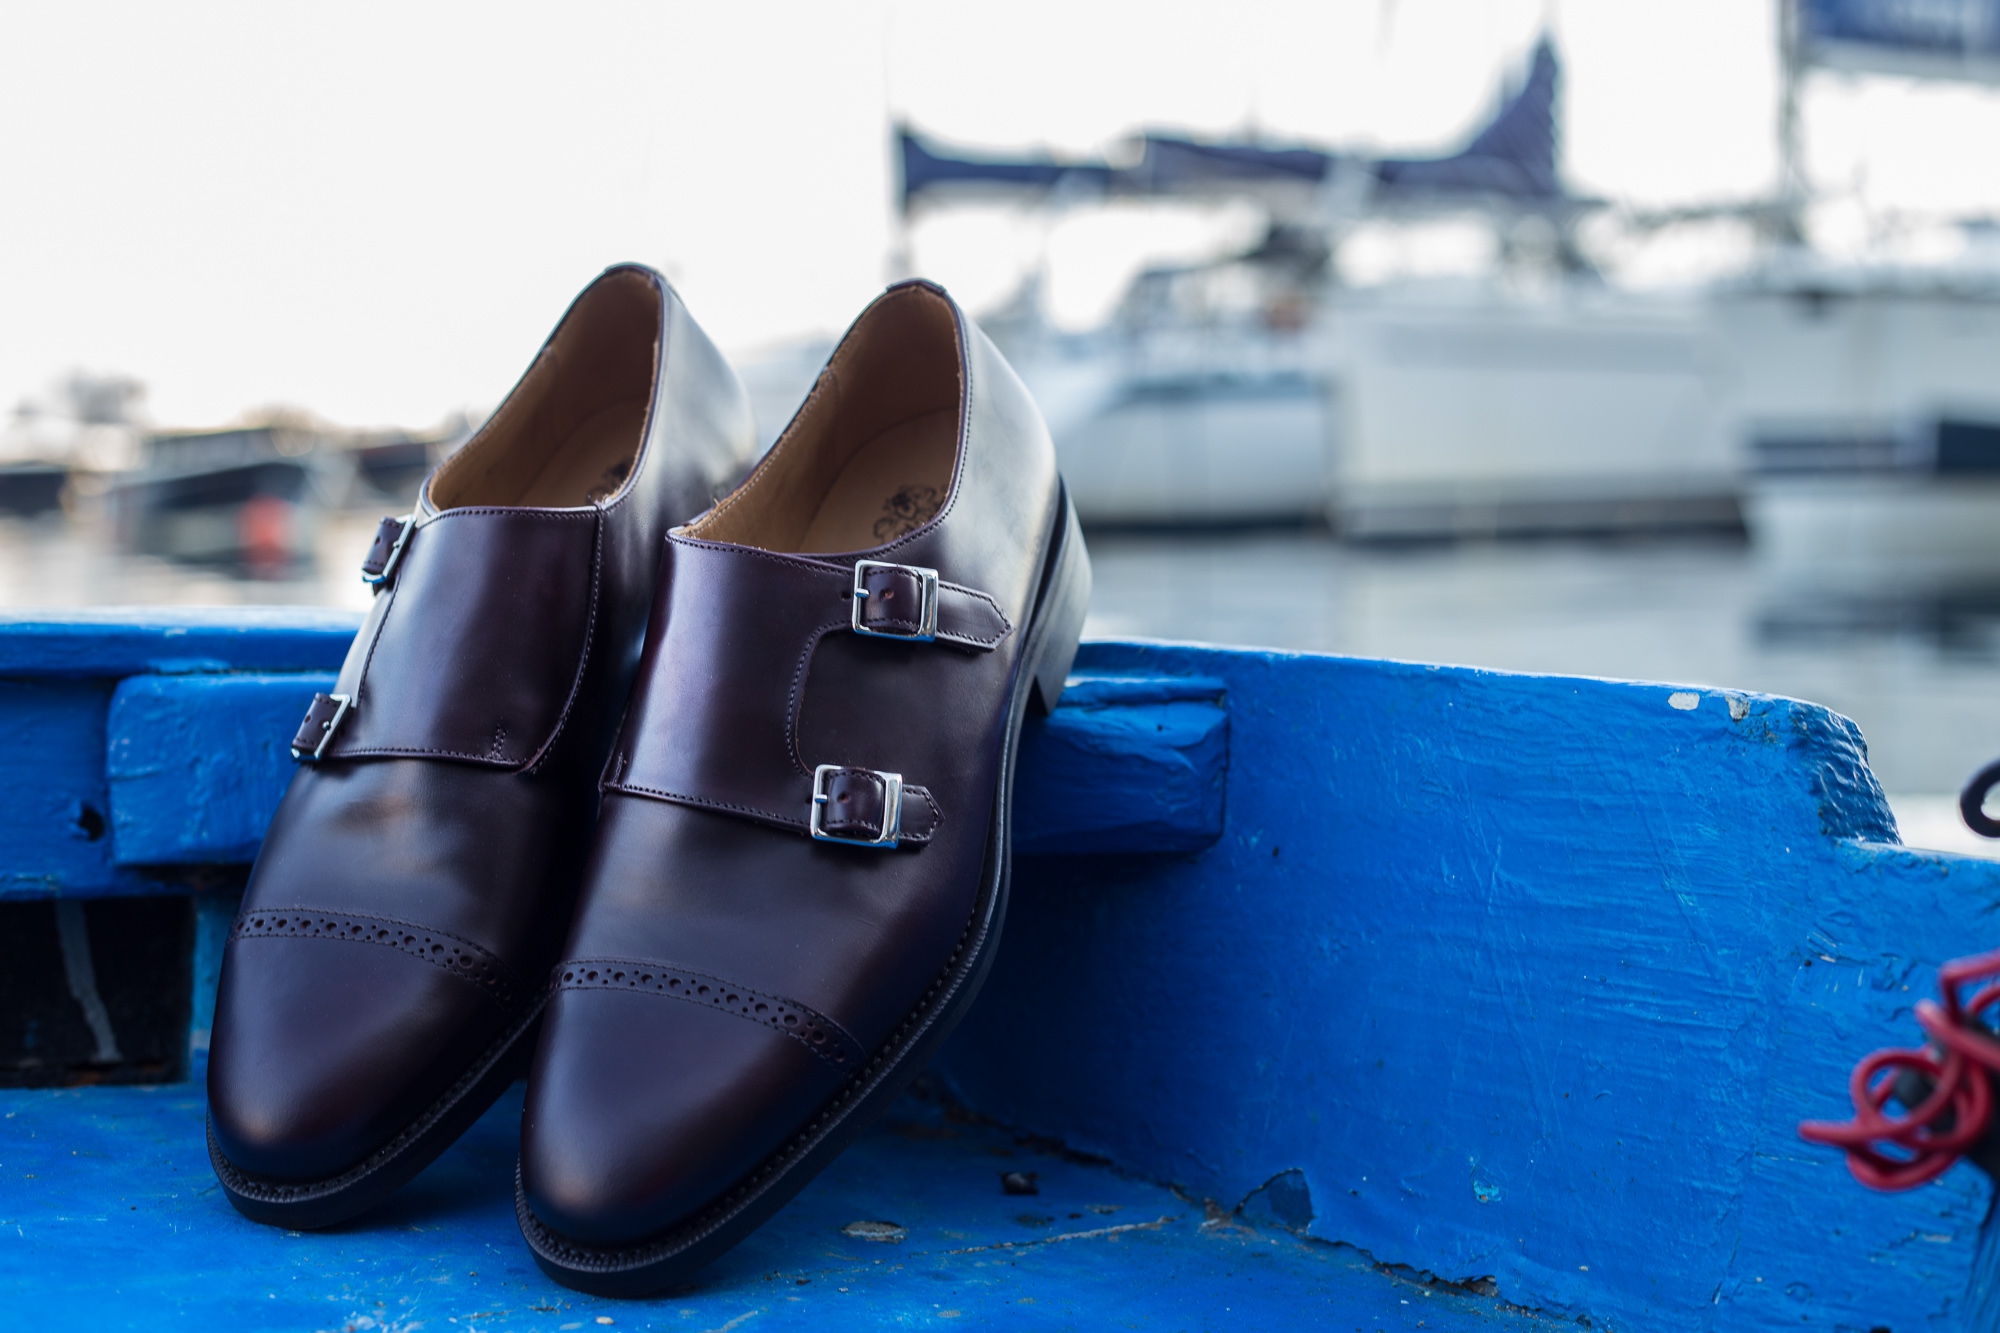 Shoes review: Bow-Tie Double-monks Goodyear welt and Dainite sole 